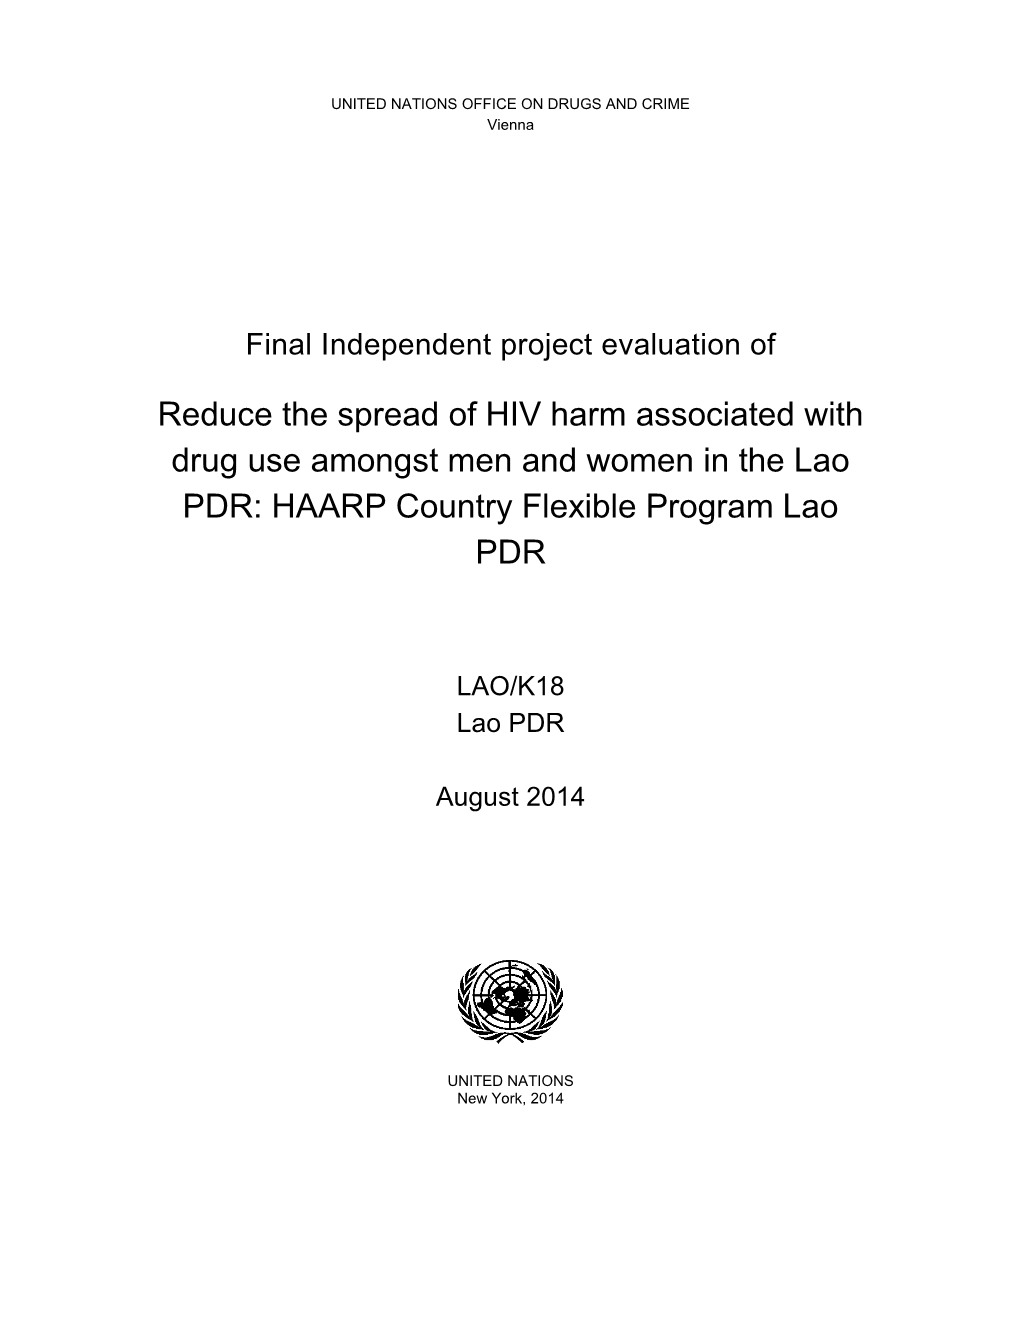 Reduce the Spread of HIV Harm Associated with Drug Use Amongst Men and Women in the Lao PDR: HAARP Country Flexible Program Lao PDR